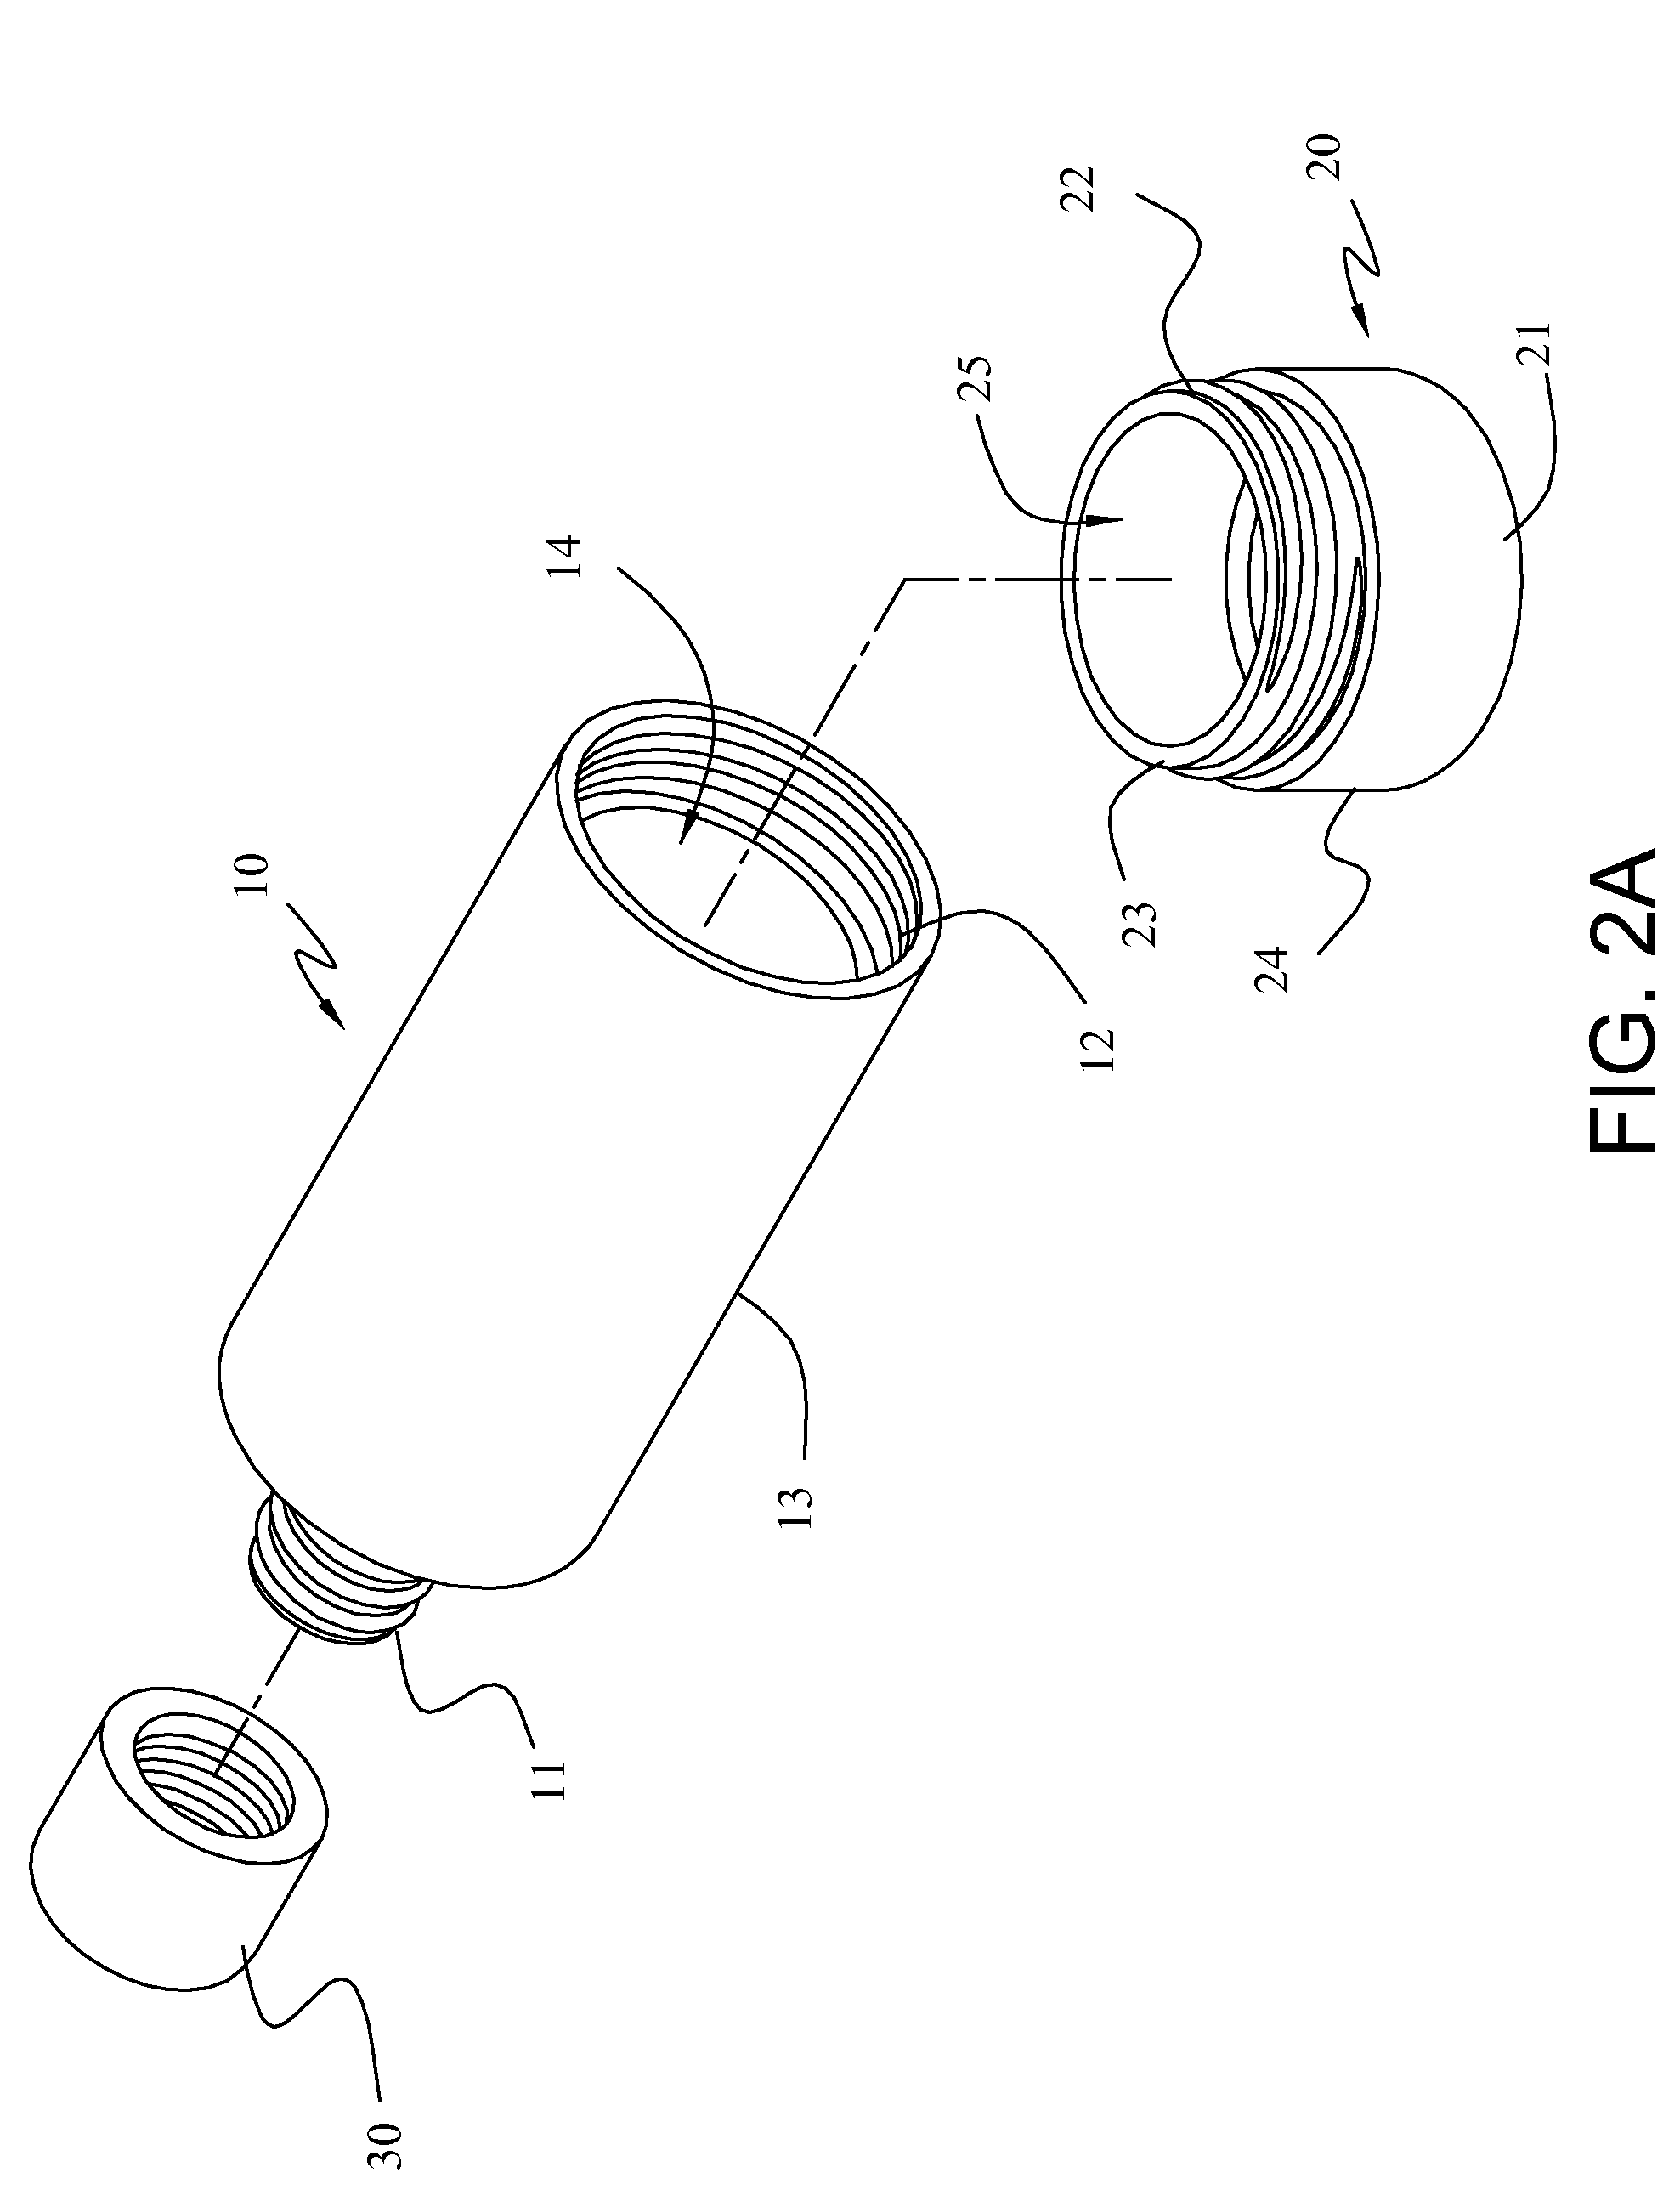 Container for enabling consumers to obtain all skin care products therein